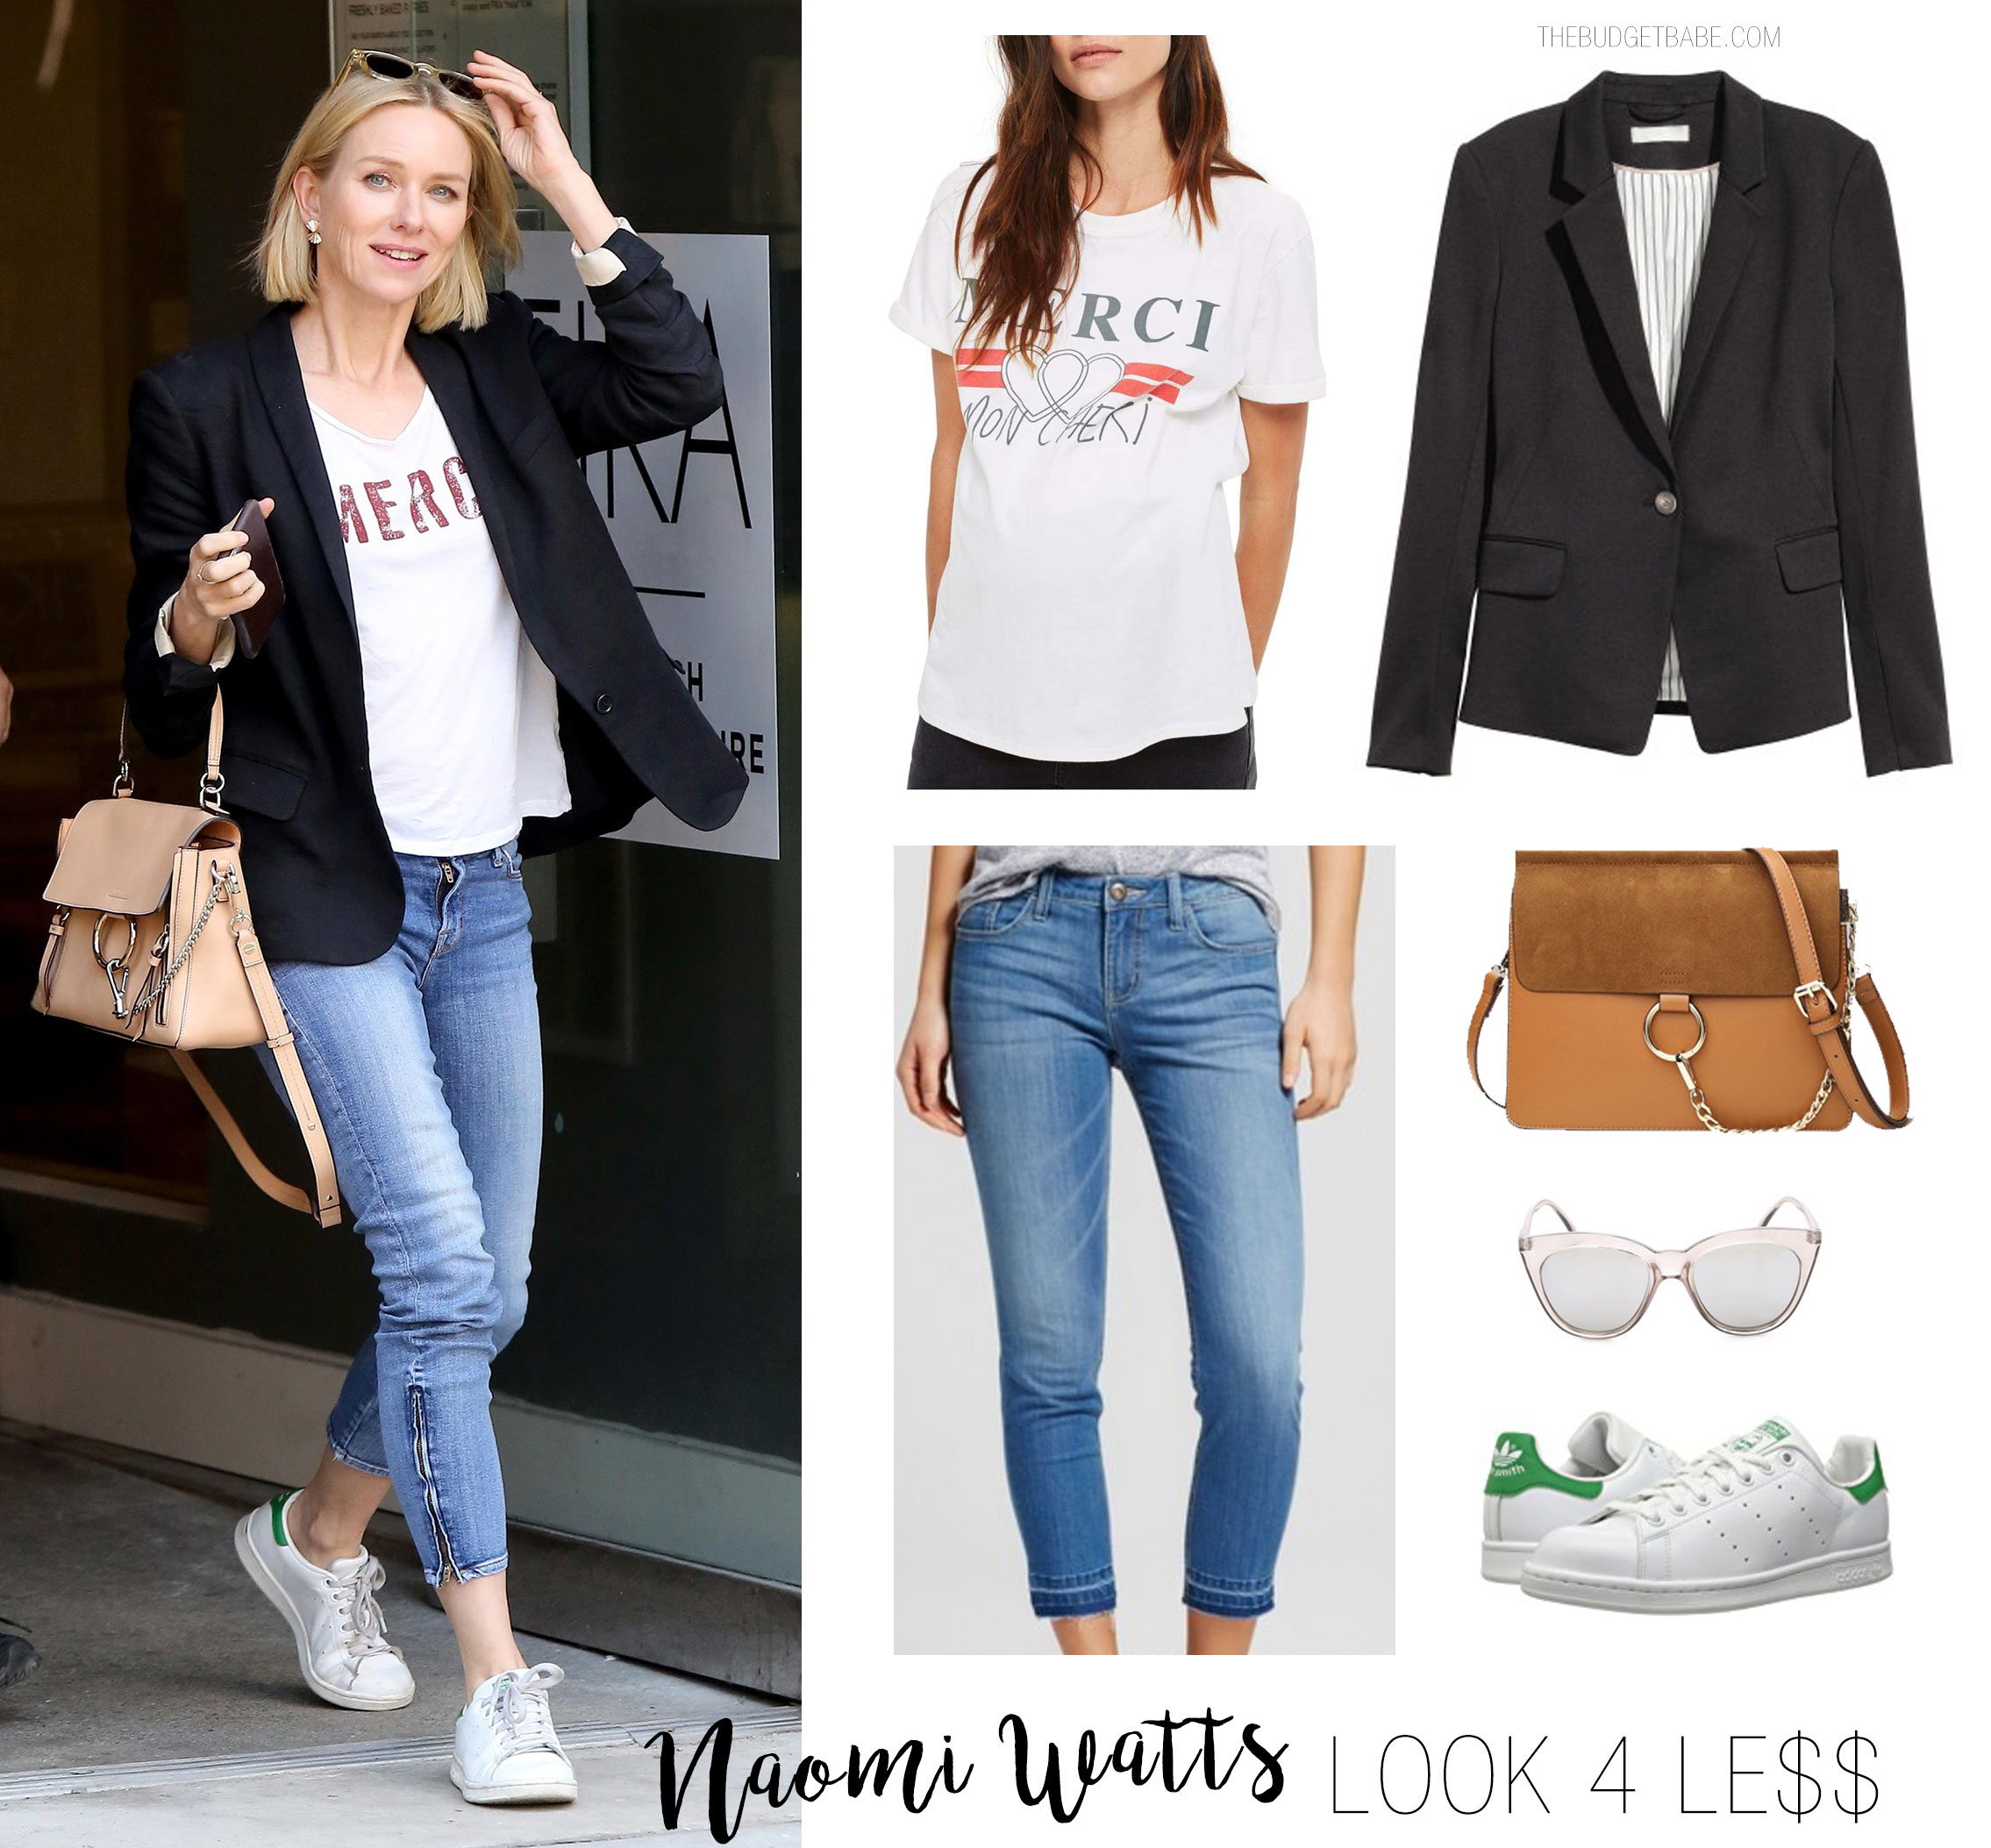 Naomi Watts looks cool and casual in a blazer, slogan t-shirt and Adidas sneakers